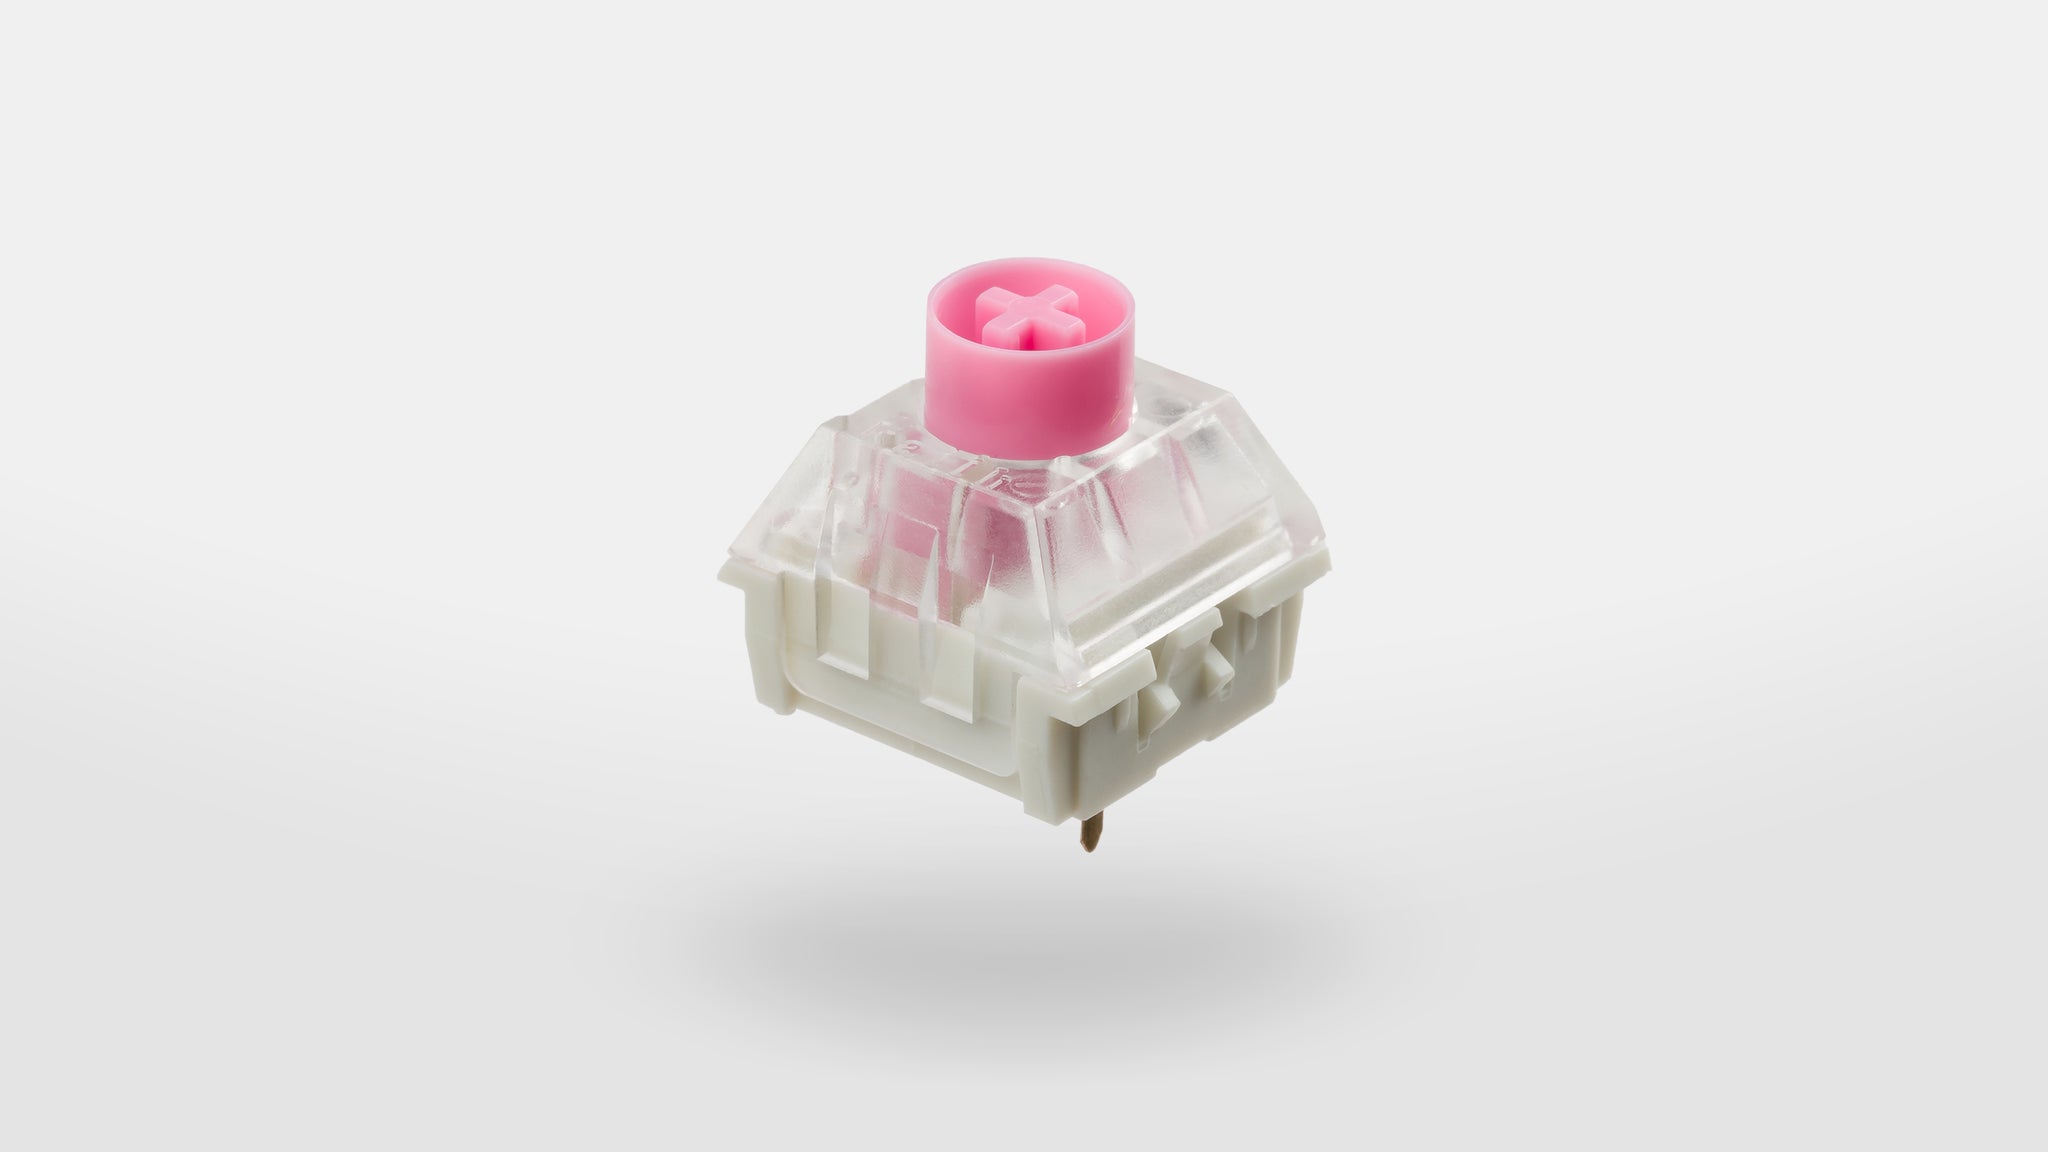 KAILH CHOC SWITCH TESTER ACRYLIC BASE 14 LOW PROFILE SWITCH RGB PINK JADE  NAVY